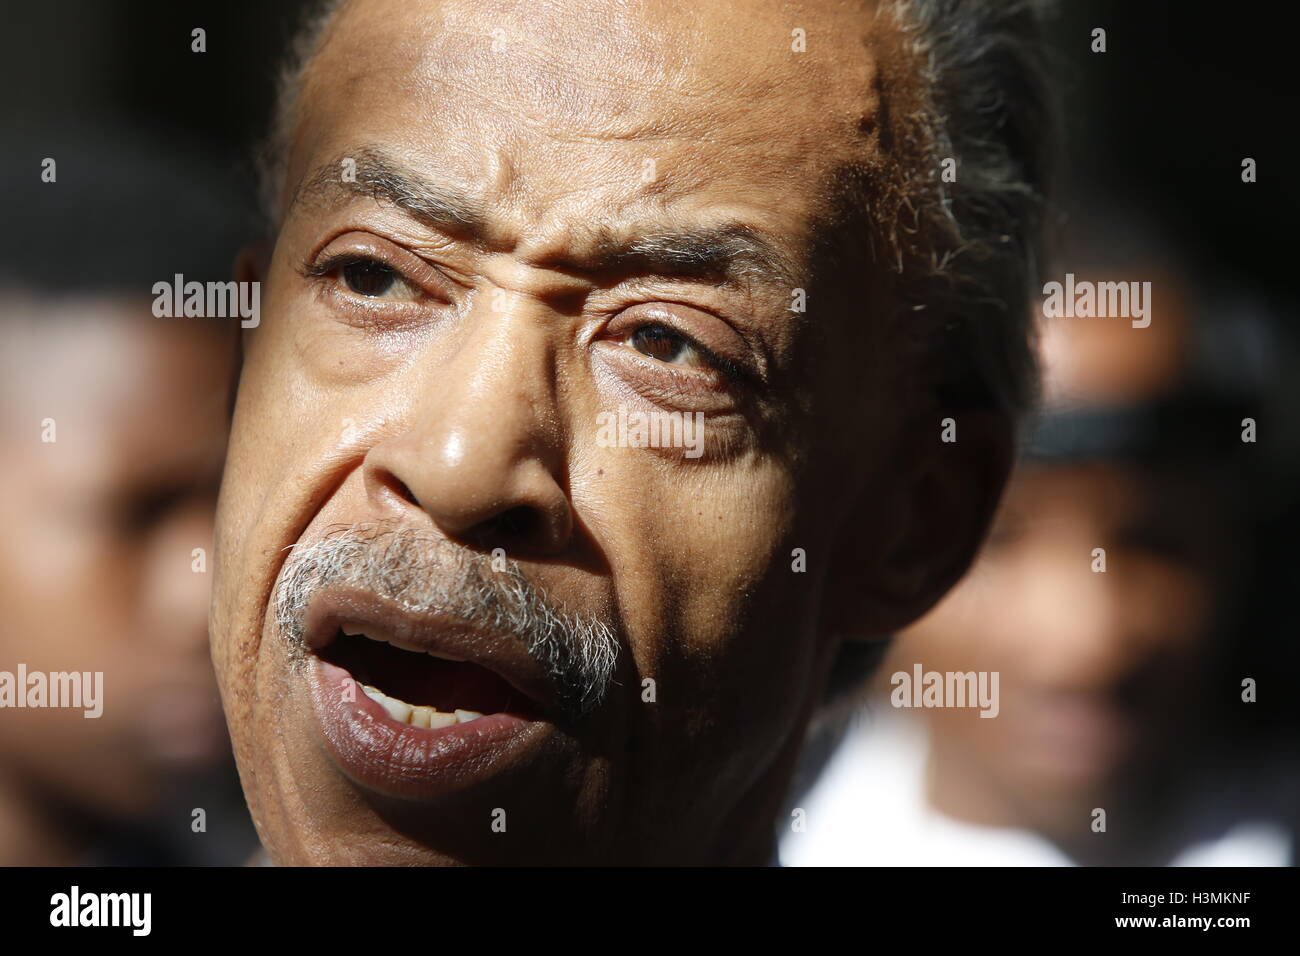 New York City, United States. 10th Oct, 2016. Rev Al Sharpton of NAN speaks to the press in Midtown. Rev Al Sharpton gathered with members of the NYC City Council in Midtown Manhattan to announce support for Haitians displaced by Hurricane Matthew, & to eulogize late Kings County district attorney Ken Thompson who passed away unexpectedly from cancer the day before. Credit:  Andy Katz/Pacific Press/Alamy Live News Stock Photo